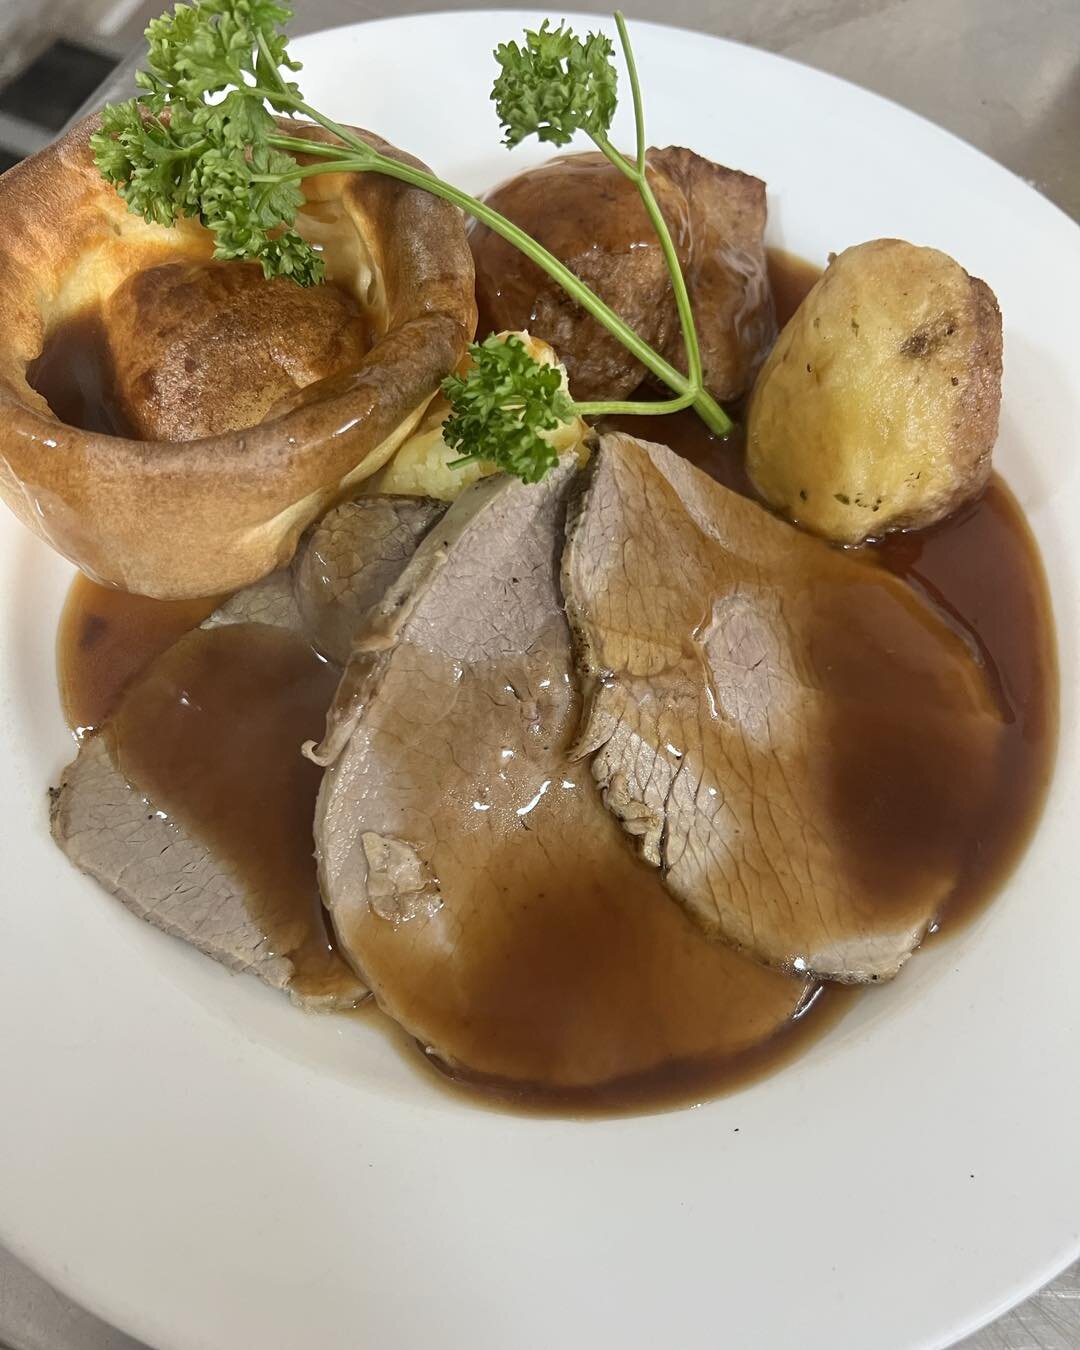 Still some spaces available for Sunday lunch tomorrow. Get in touch through Facebook or phone us on 01492650291 to book! 🐝